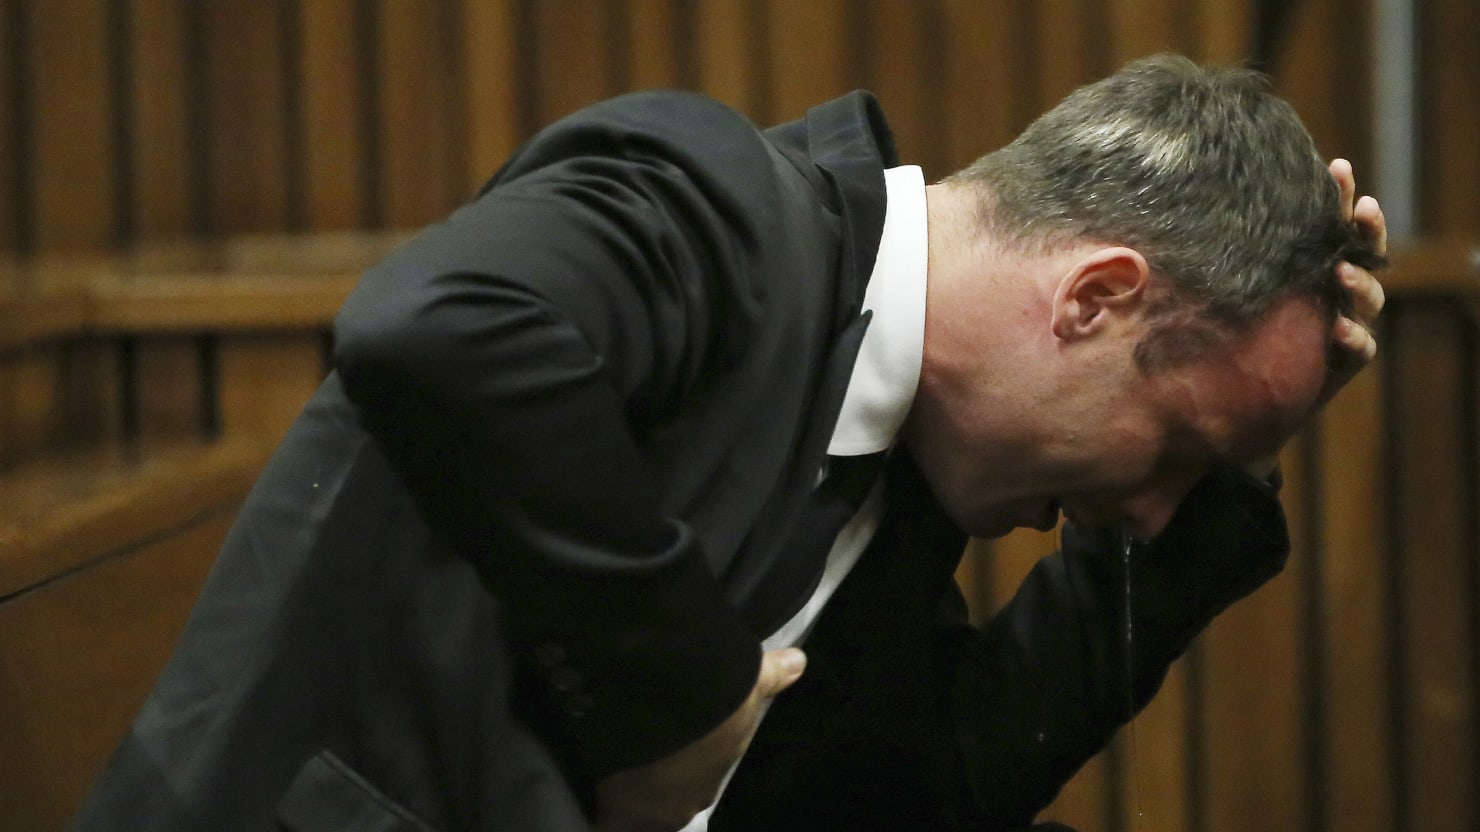 Oscar Pistorius’s Sobbing Fit On The Witness Stand1480 x 832